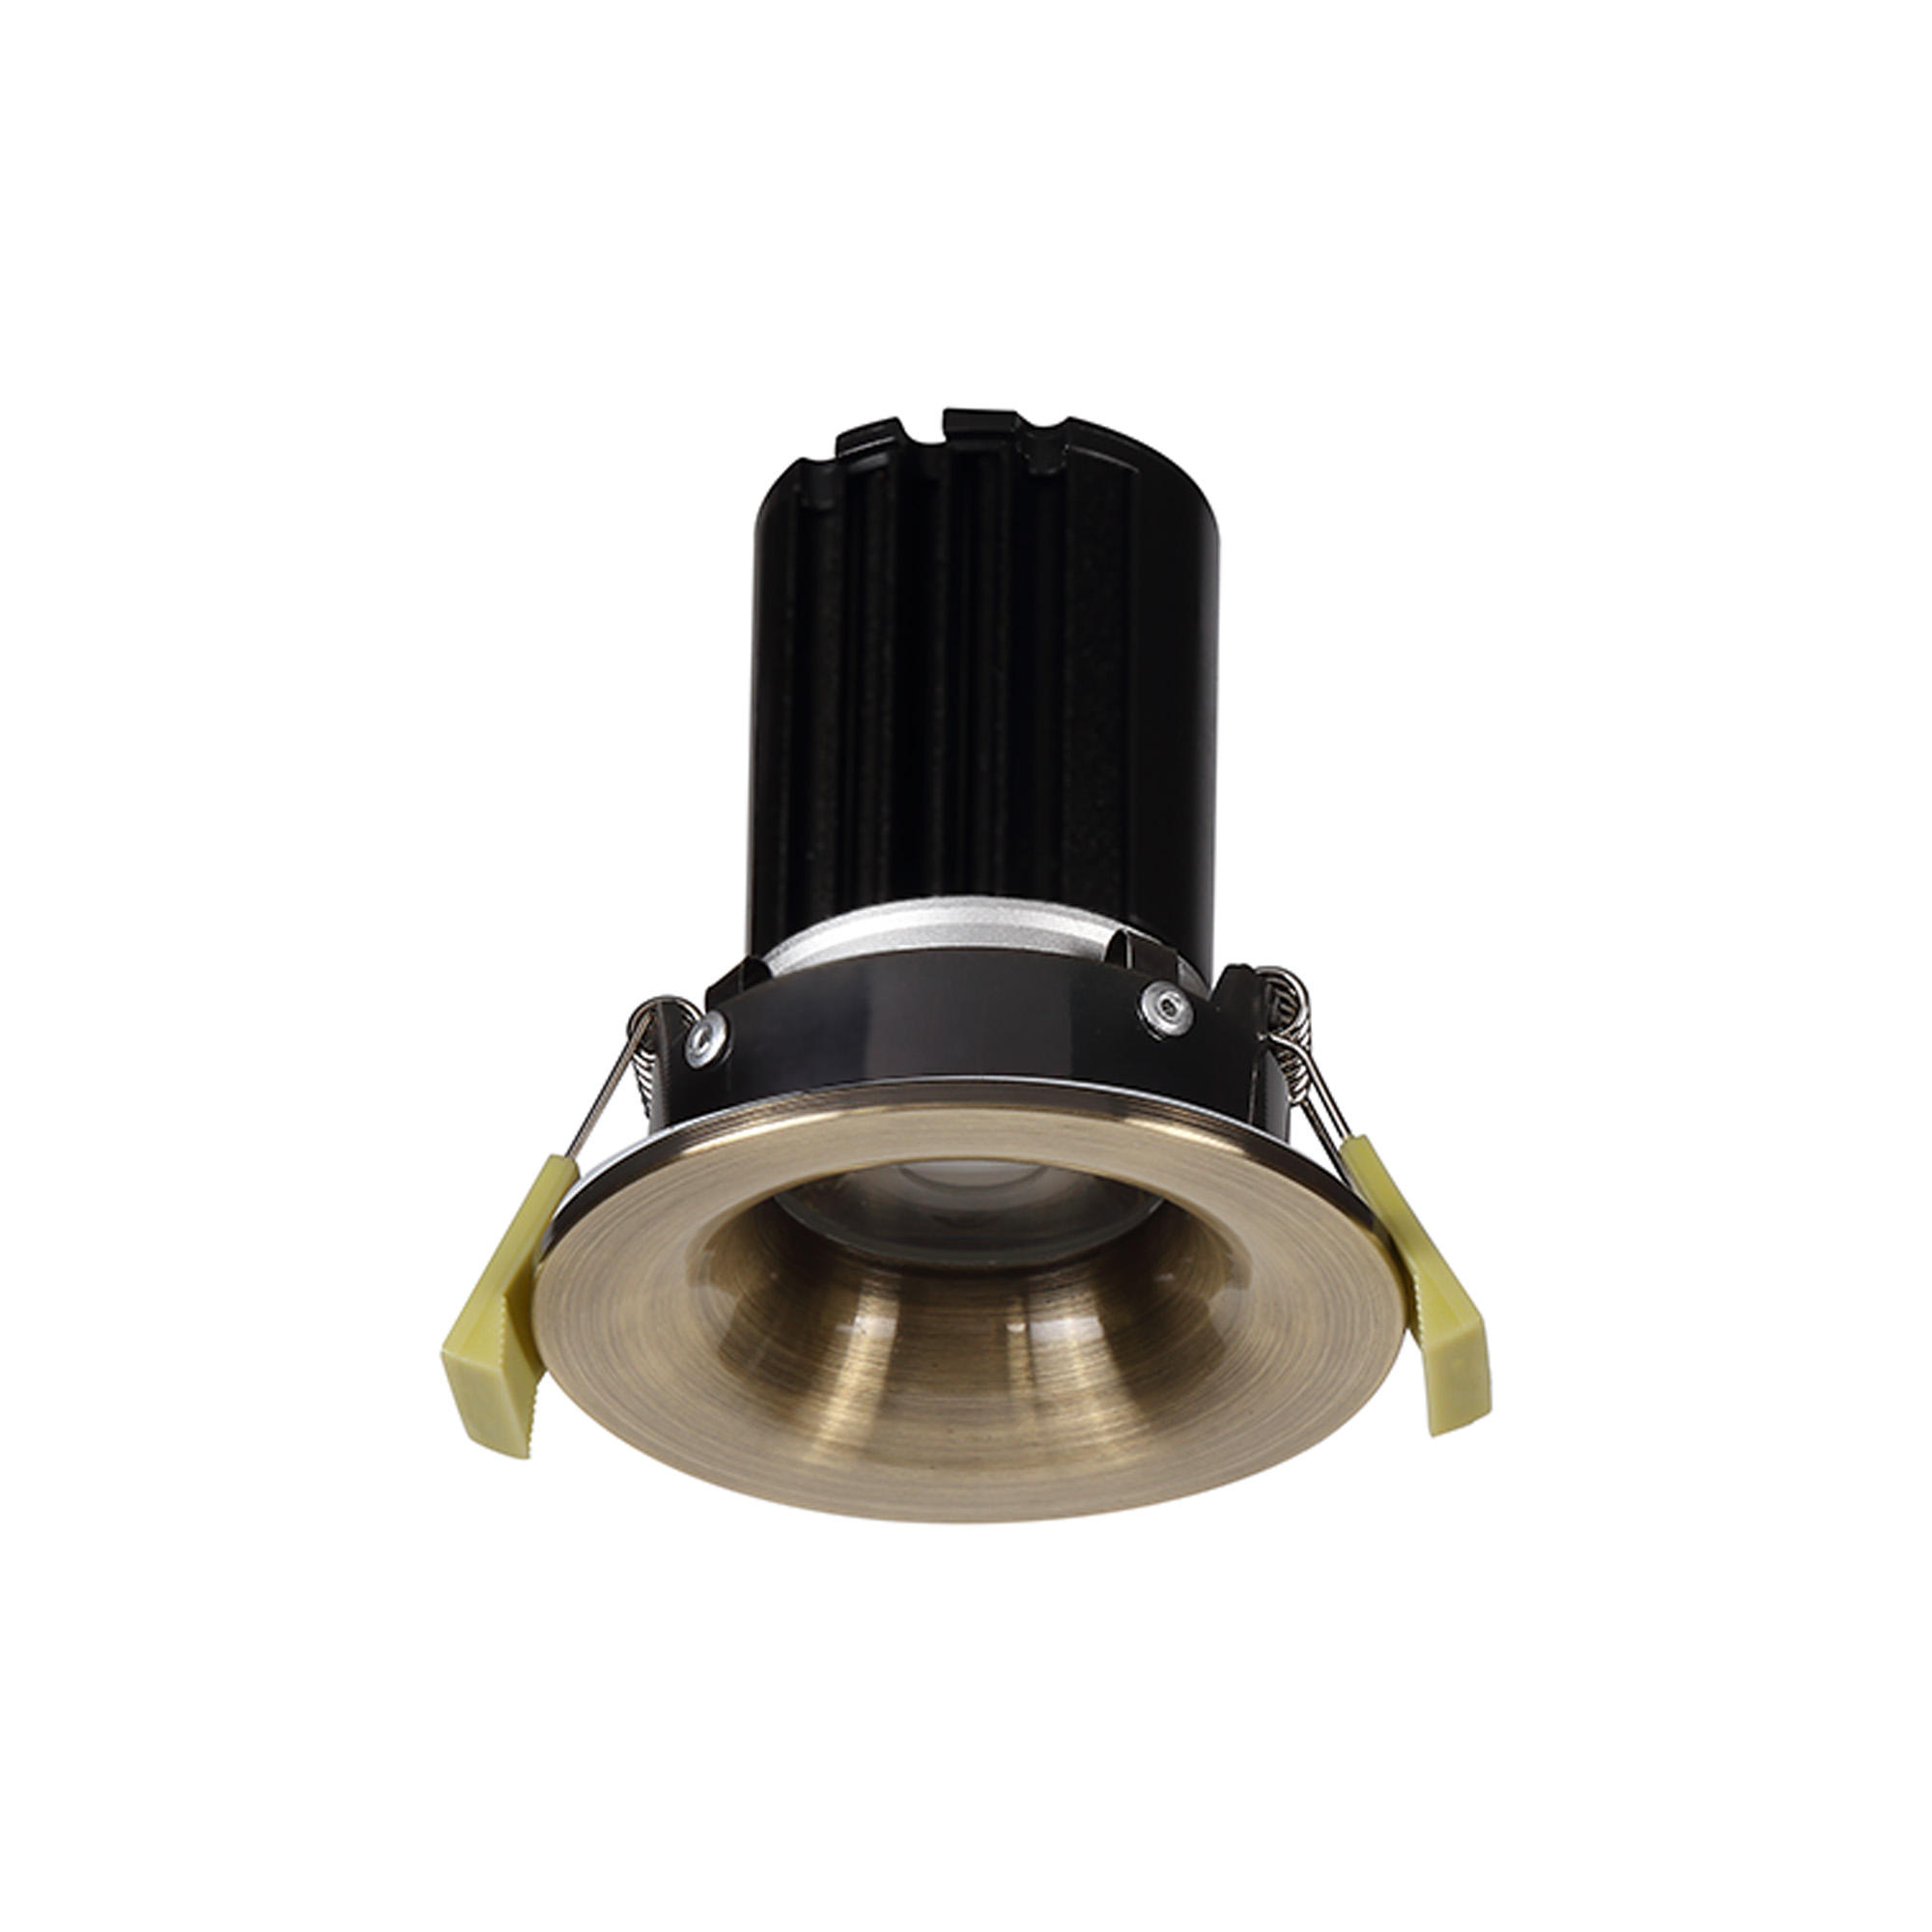 DM201480  Bruve 9 Tridonic powered 9W 2700K 700lm 24° LED Engine;250mA ; CRI>90 LED Engine  Antique Brass Fixed Round Recessed Downlight; Inner Glass cover; IP65